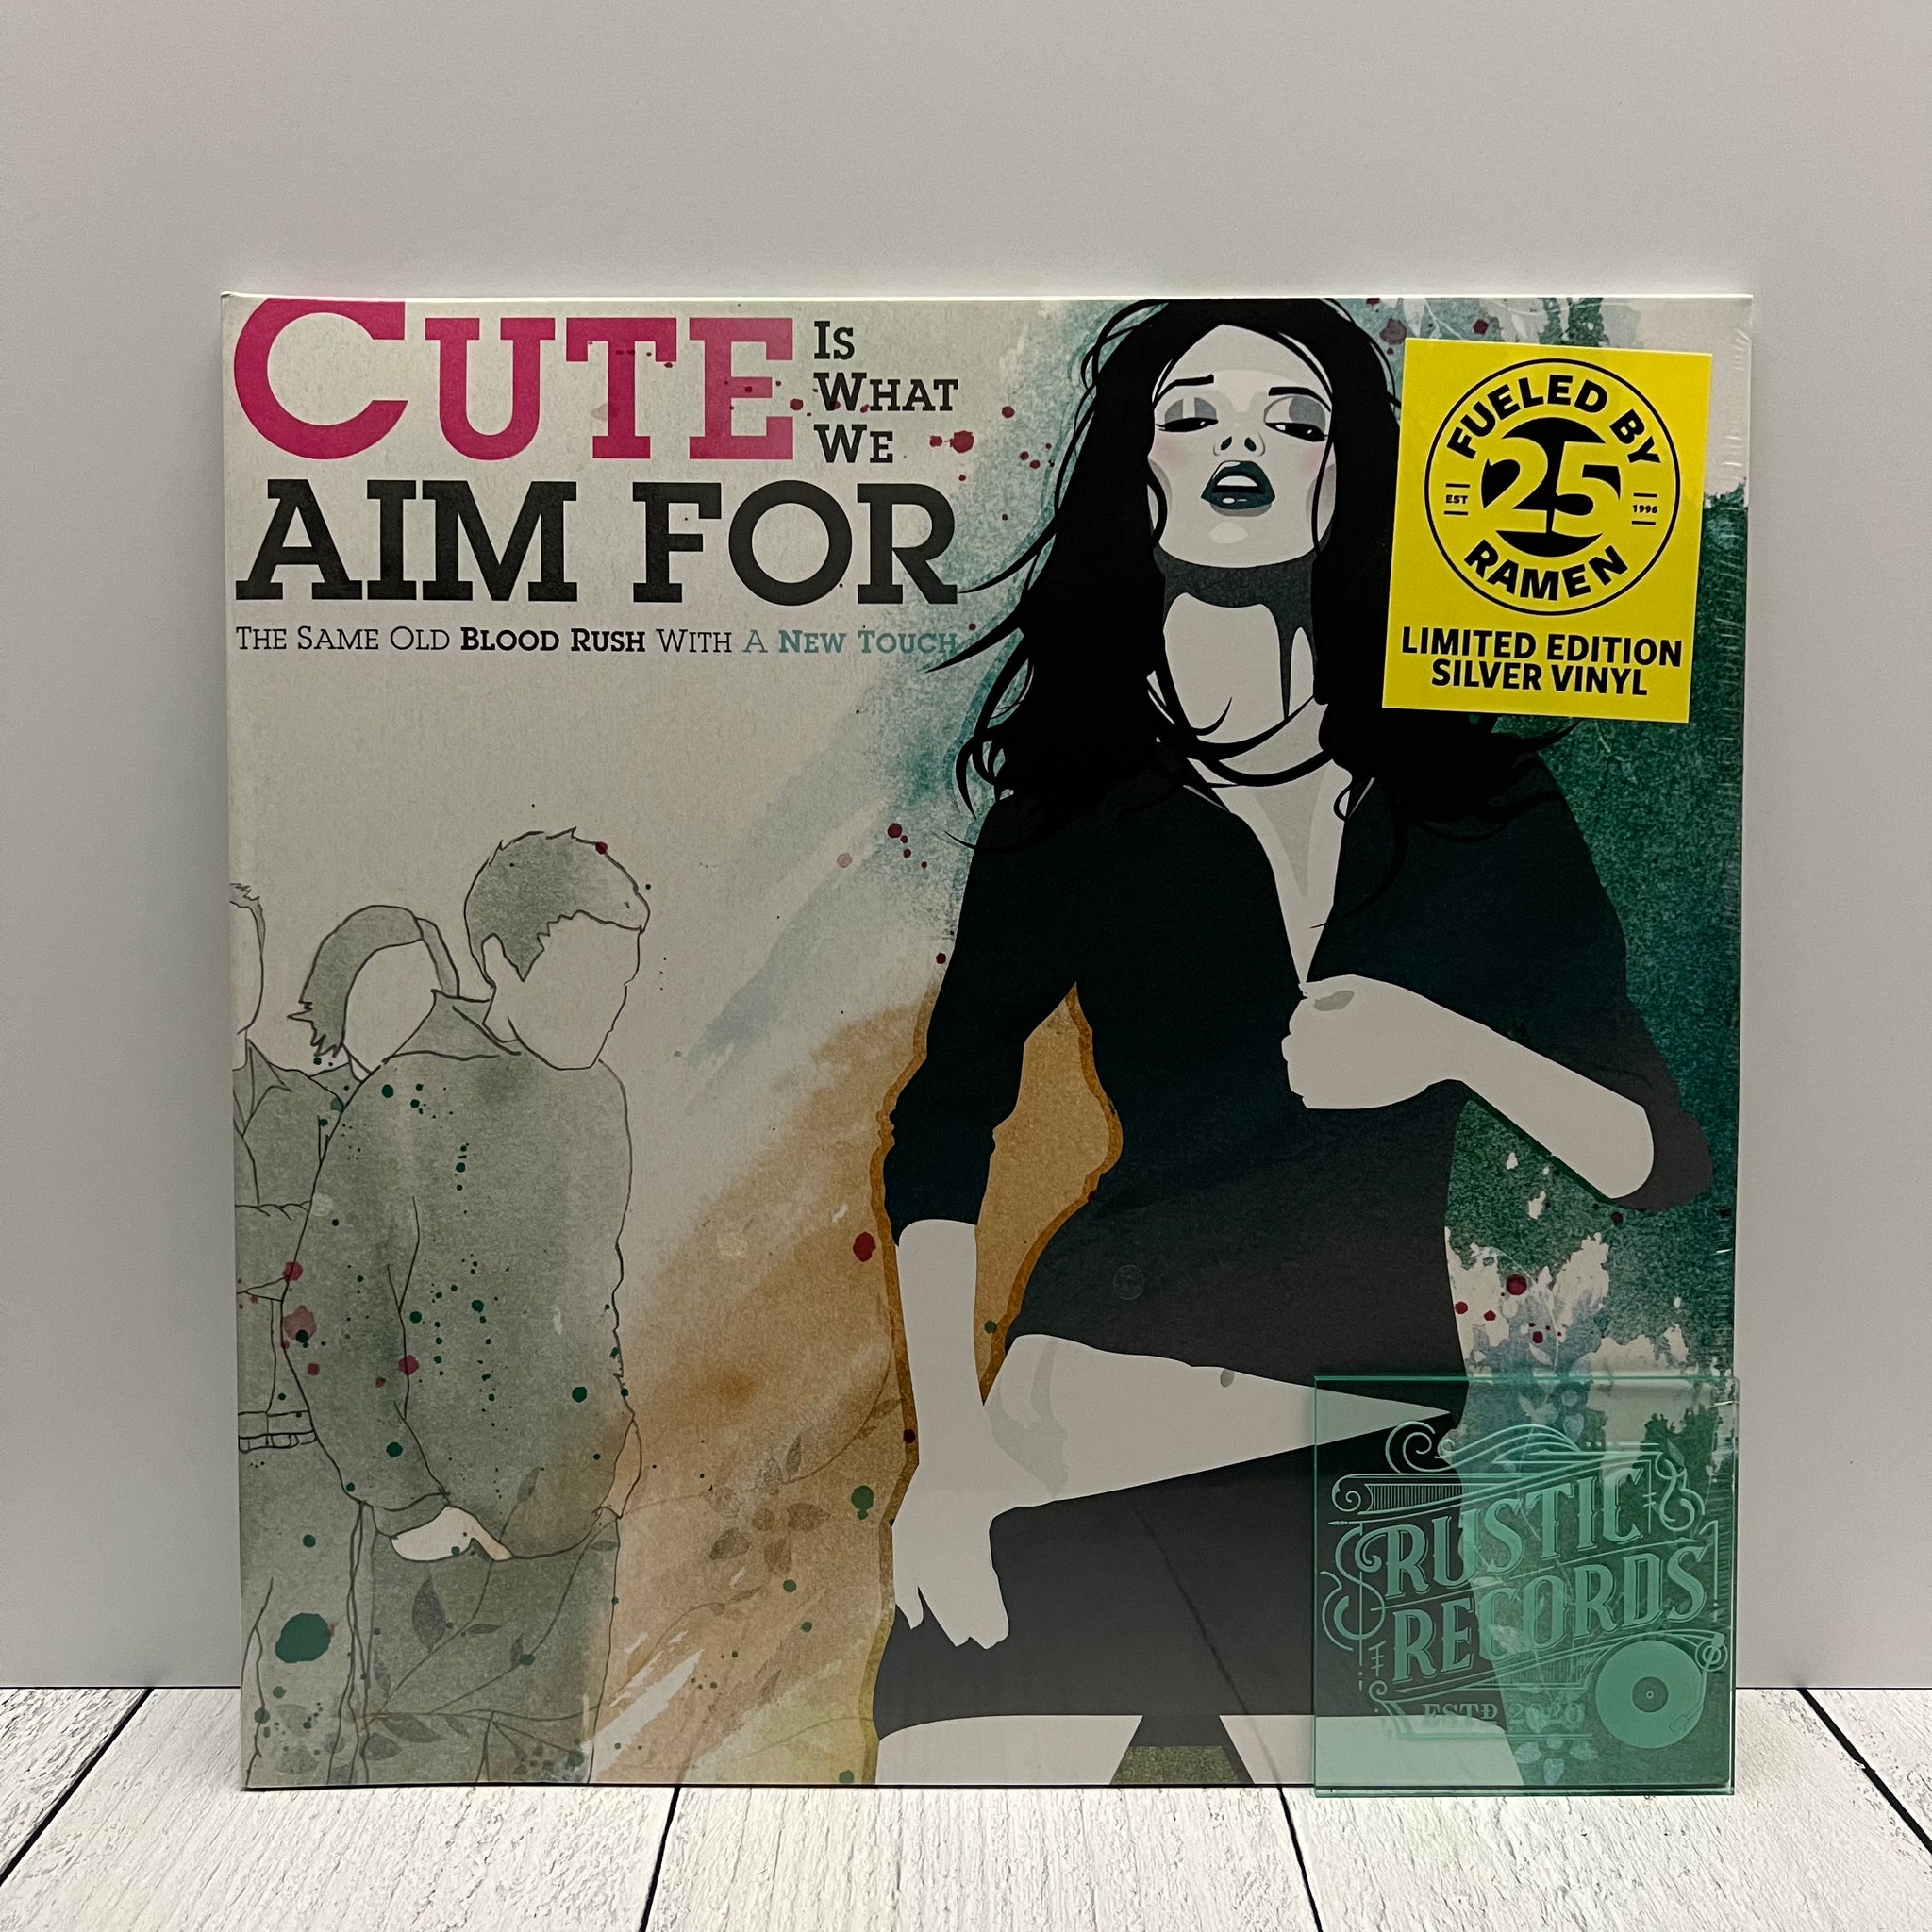 Cute Is What We Aim For - The Same Old Blood Rush With A New Touch (FBR 25th anniversary on silver vinyl)